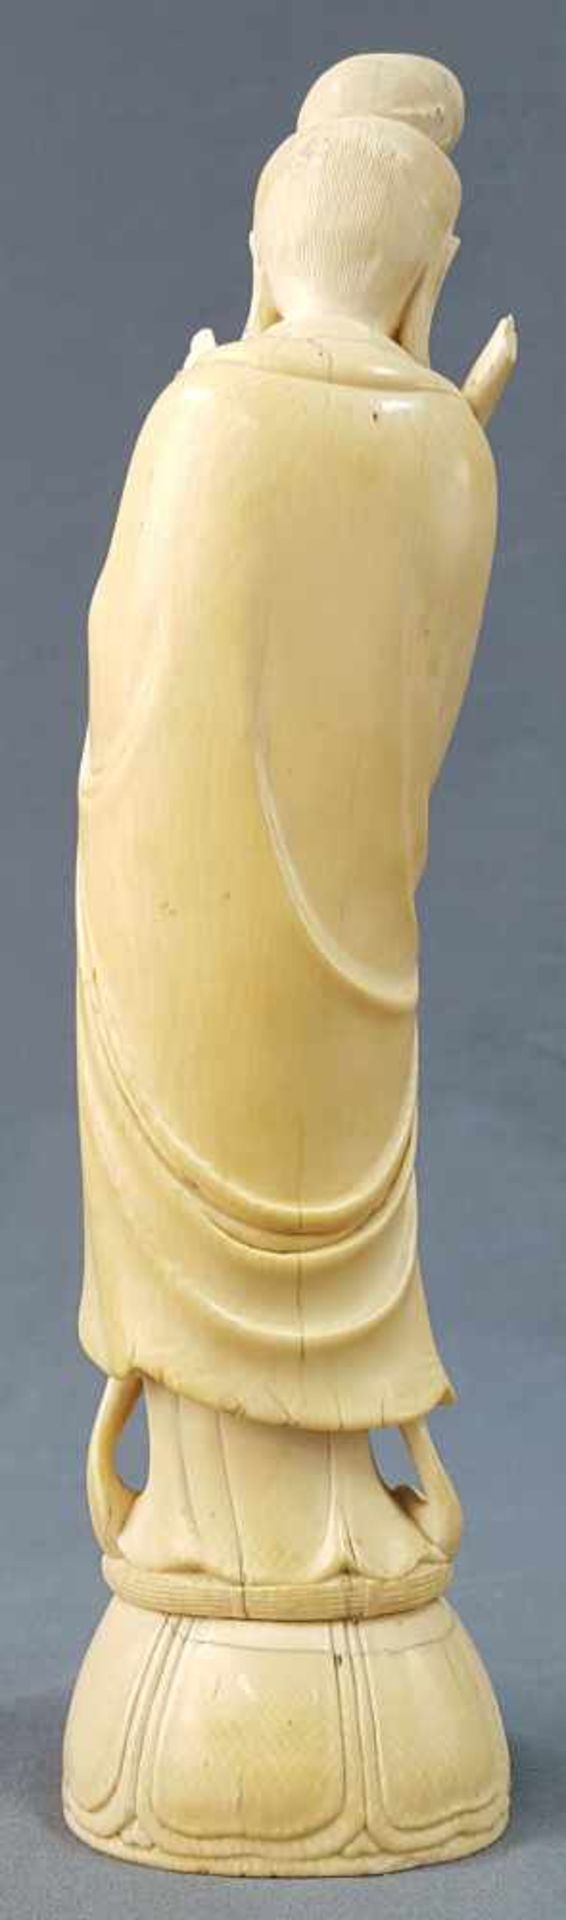 Lady with blessing hand and vessel. China / Japan. Ivory. Old, around 1920. - Image 3 of 7